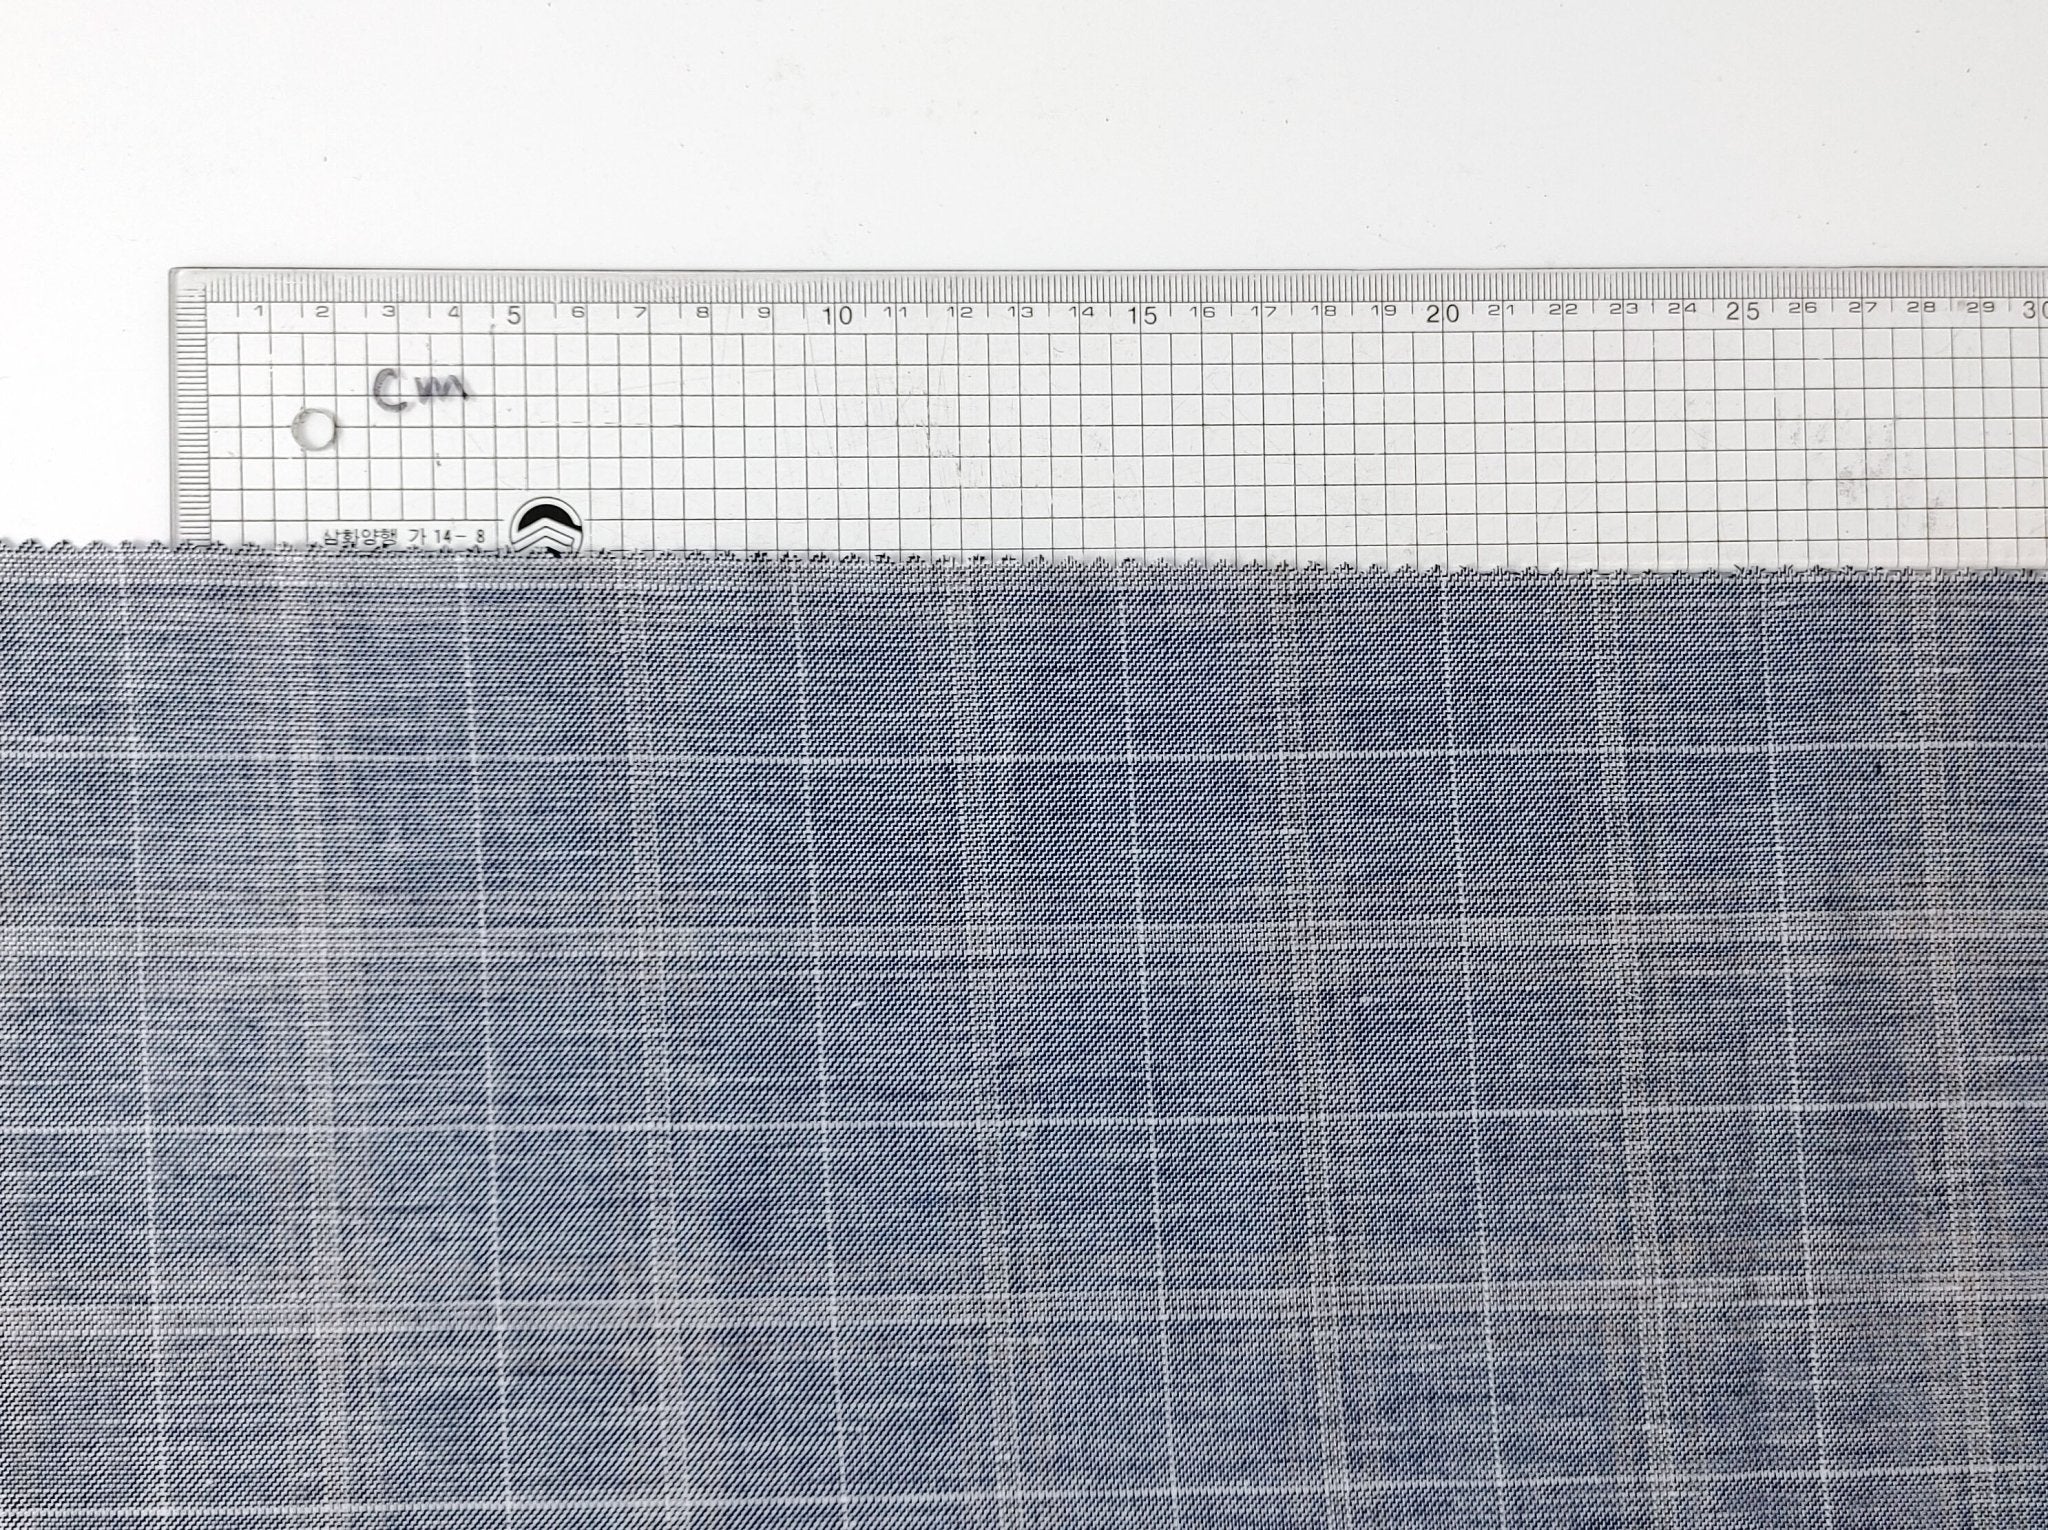 Light-Medium Weight Linen Cotton Twill Fabric with Simple Plaid Pattern 4393 - The Linen Lab - Navy